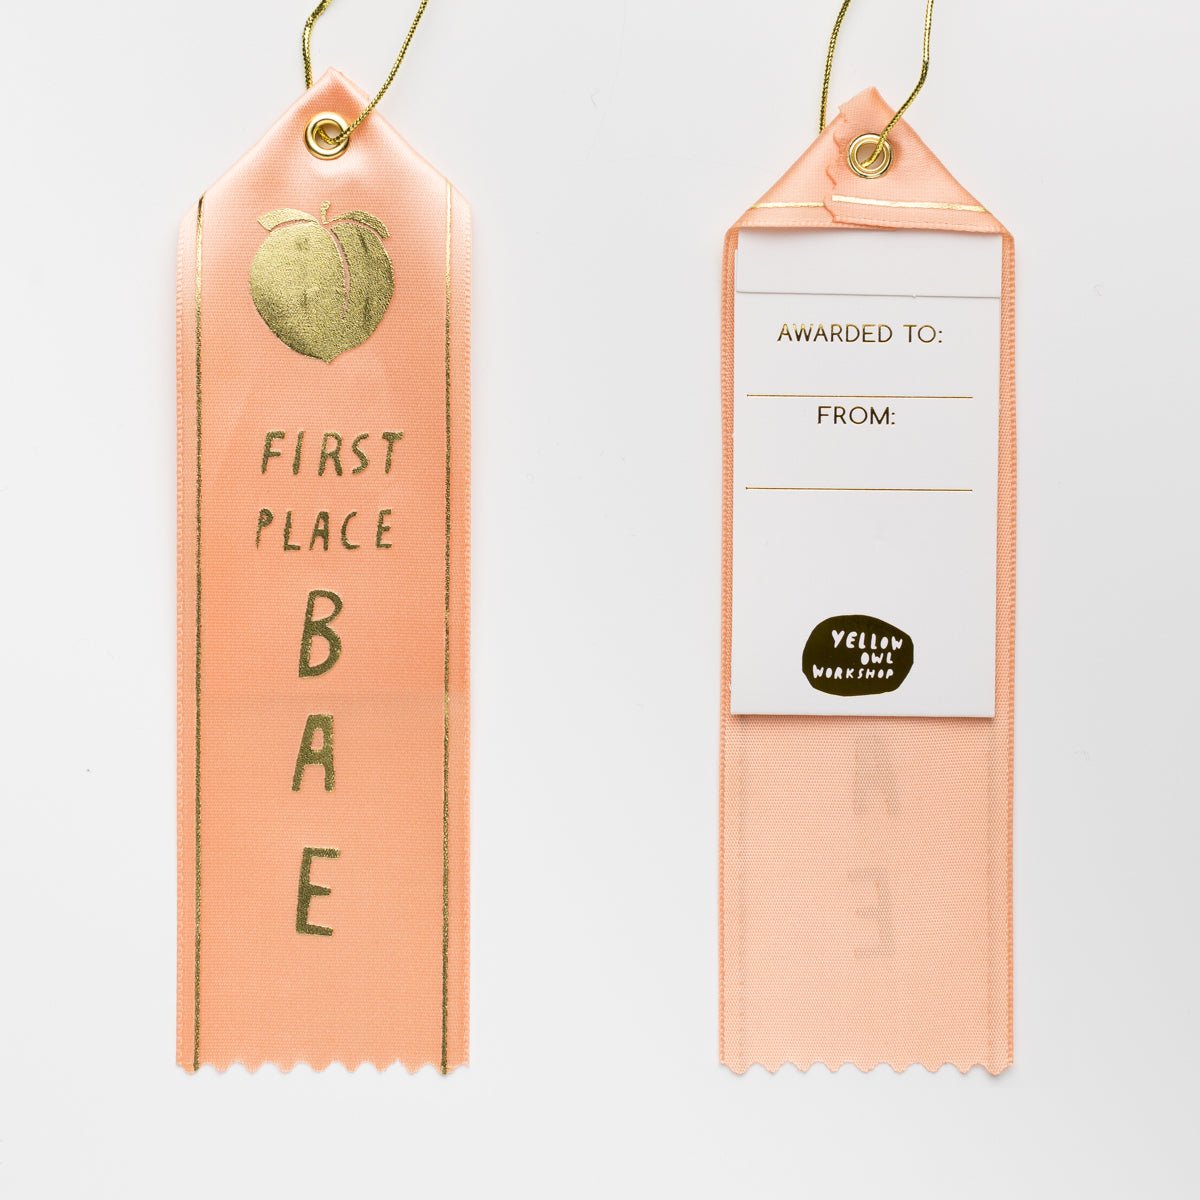 First Place Bae - Award Ribbon Card - Yellow Owl Workshop